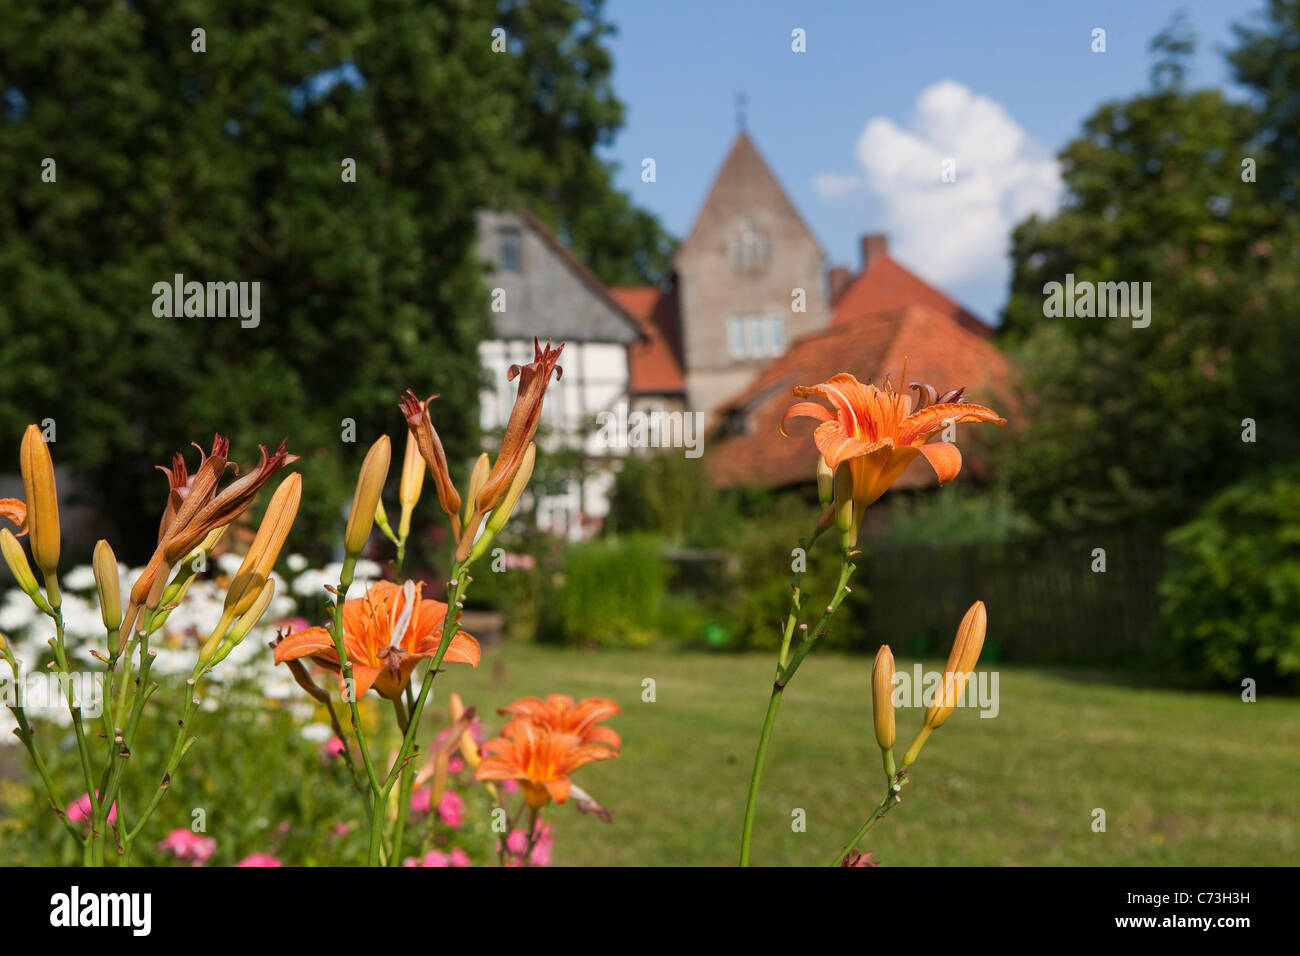 Fischbeck Abbey, Garden of the abbey, Fischbeck, Hessisch Oldendorf, Lower Saxony, Germany Stock Photo